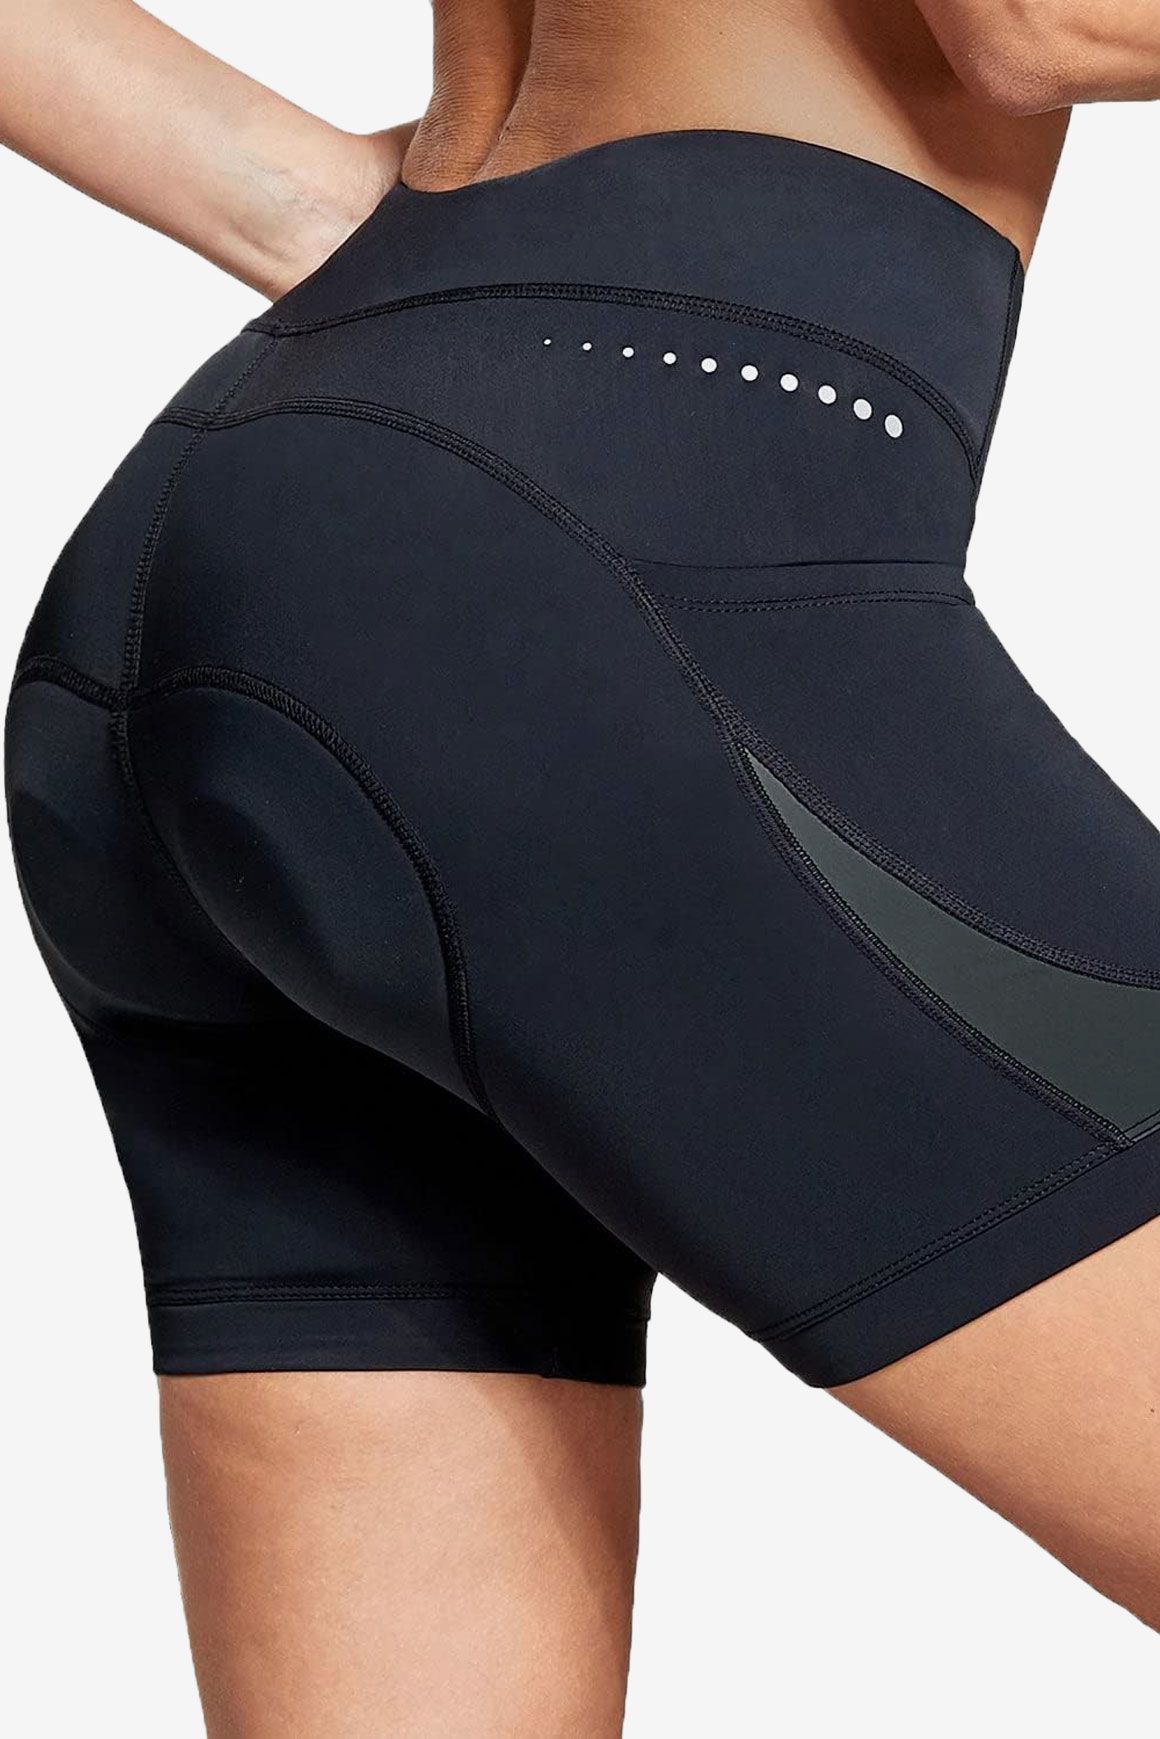 Cycling shorts for women, Shop for the best at NA-KD